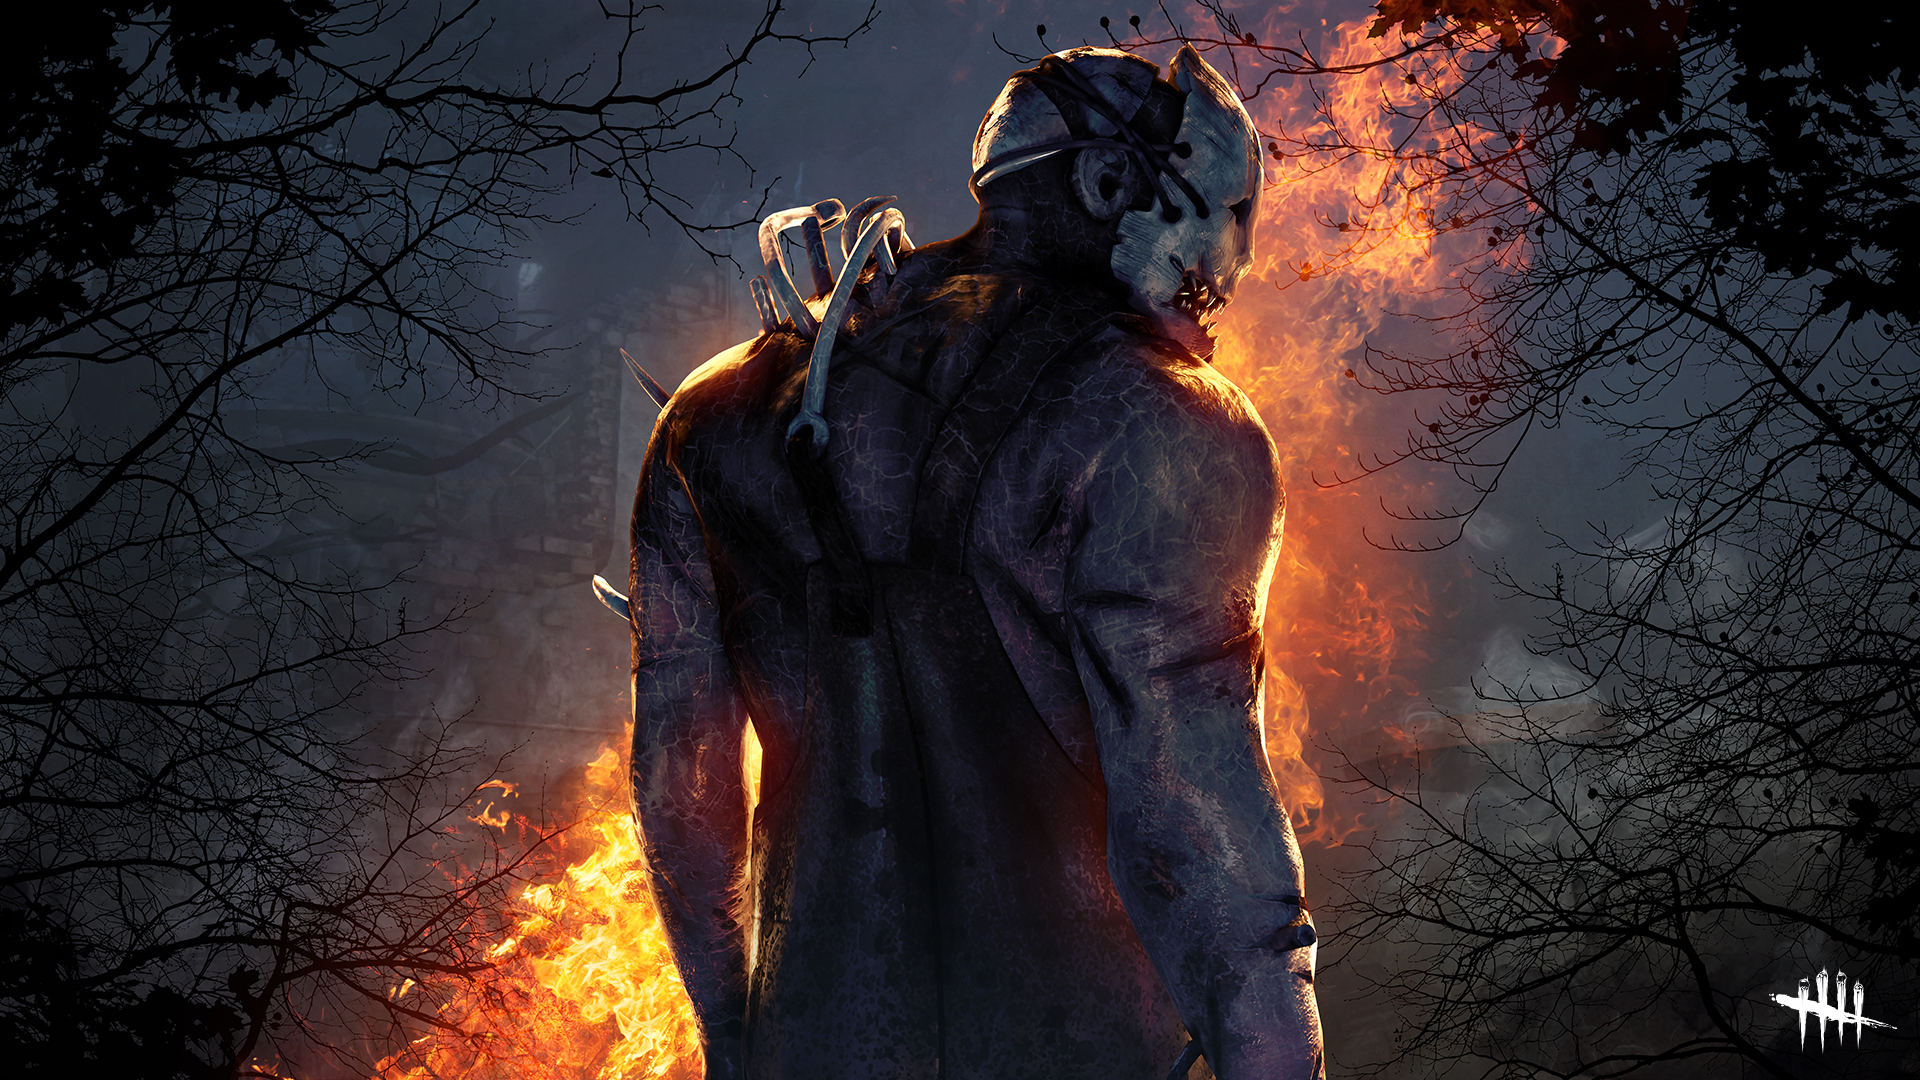 Dead By Daylight Killers Lore Powers Weapons And Perks Pocket Tactics